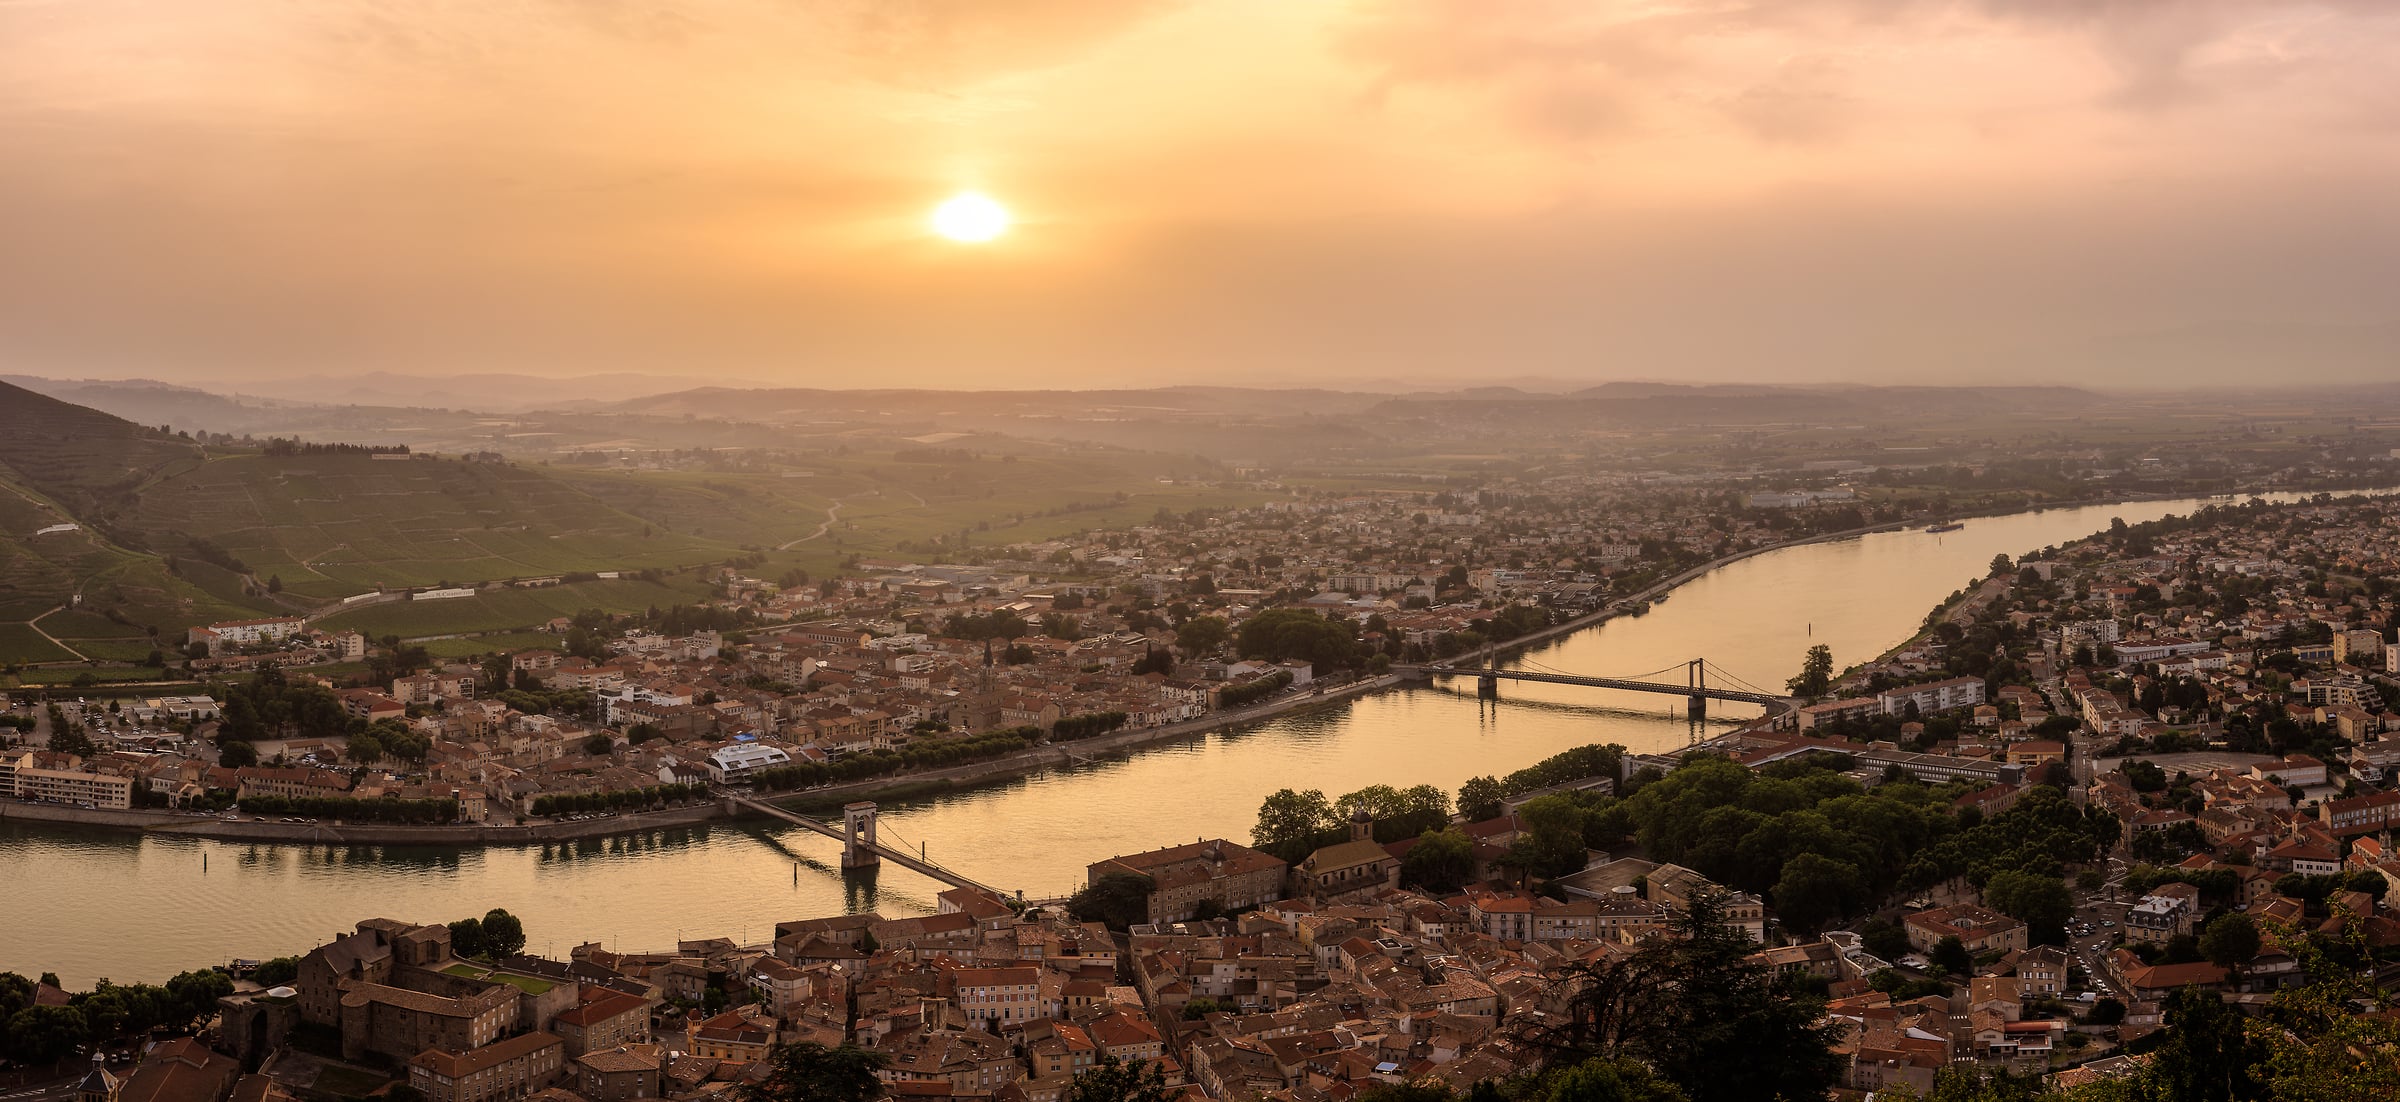 381 megapixels! A very high resolution, large-format VAST photo print of sunrise over the Rhône River with a town and bridges; photograph created by Scott Dimond in Tournon-sur-Rhône, France.